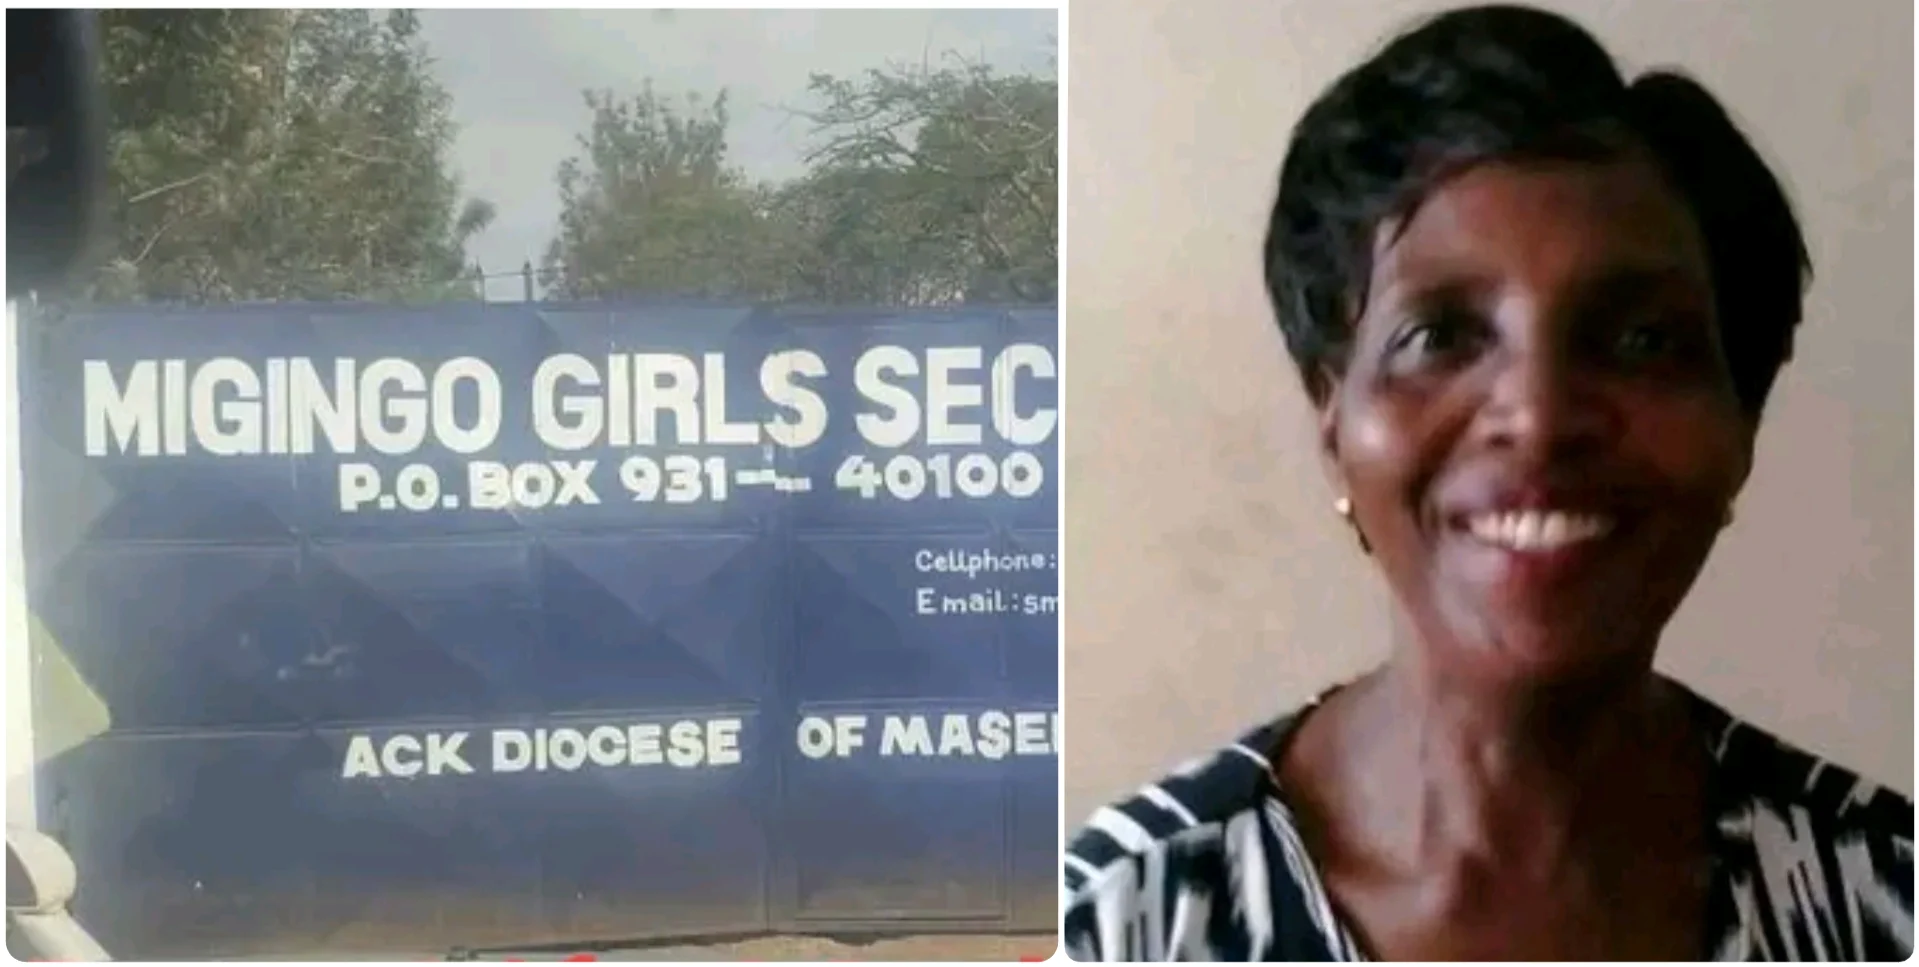 The Deputy Principal of Migingo Girls Secondary School, Madam Roselyn Nyawanda has allegedly been killed by her own son in the school house.